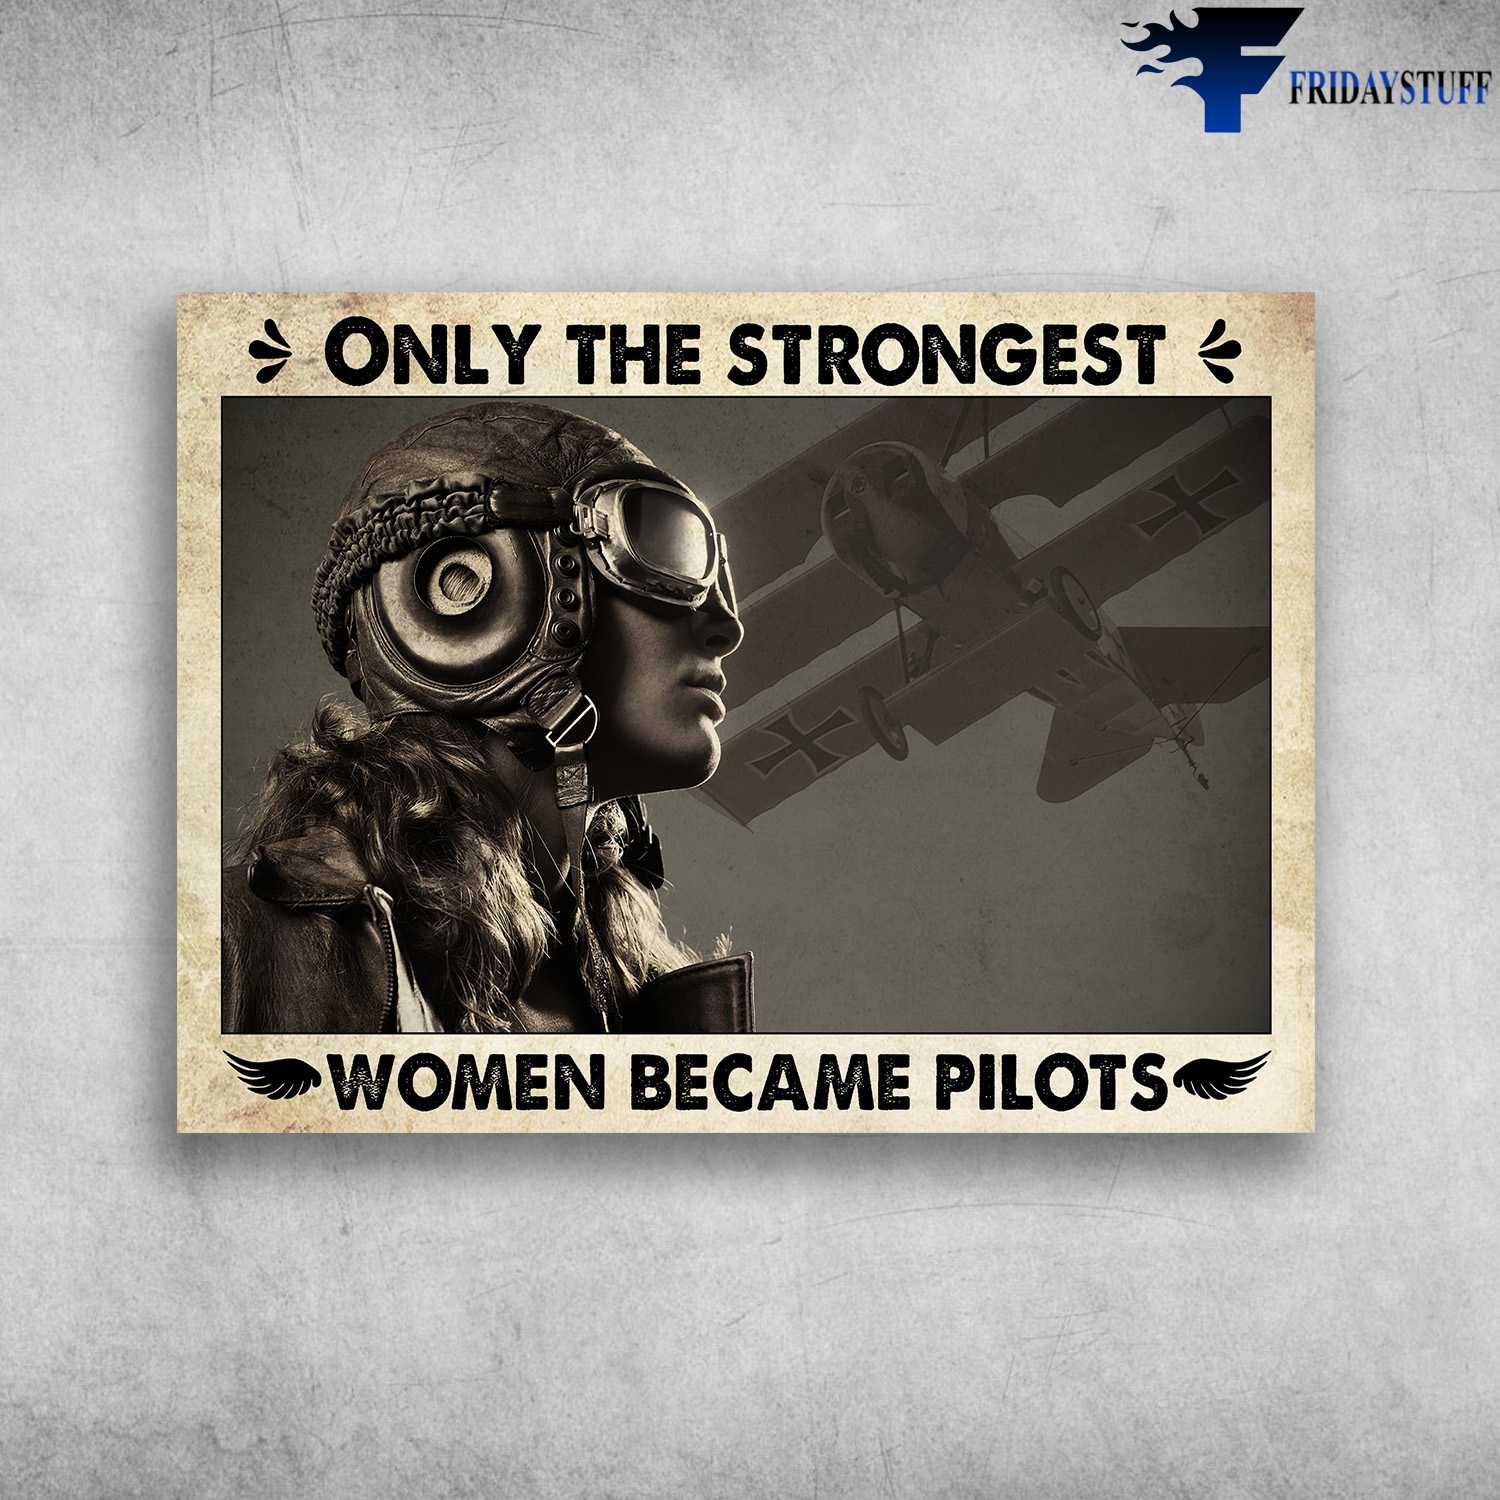 Pilot Woman - Only The Strongest Woman Became Pilots